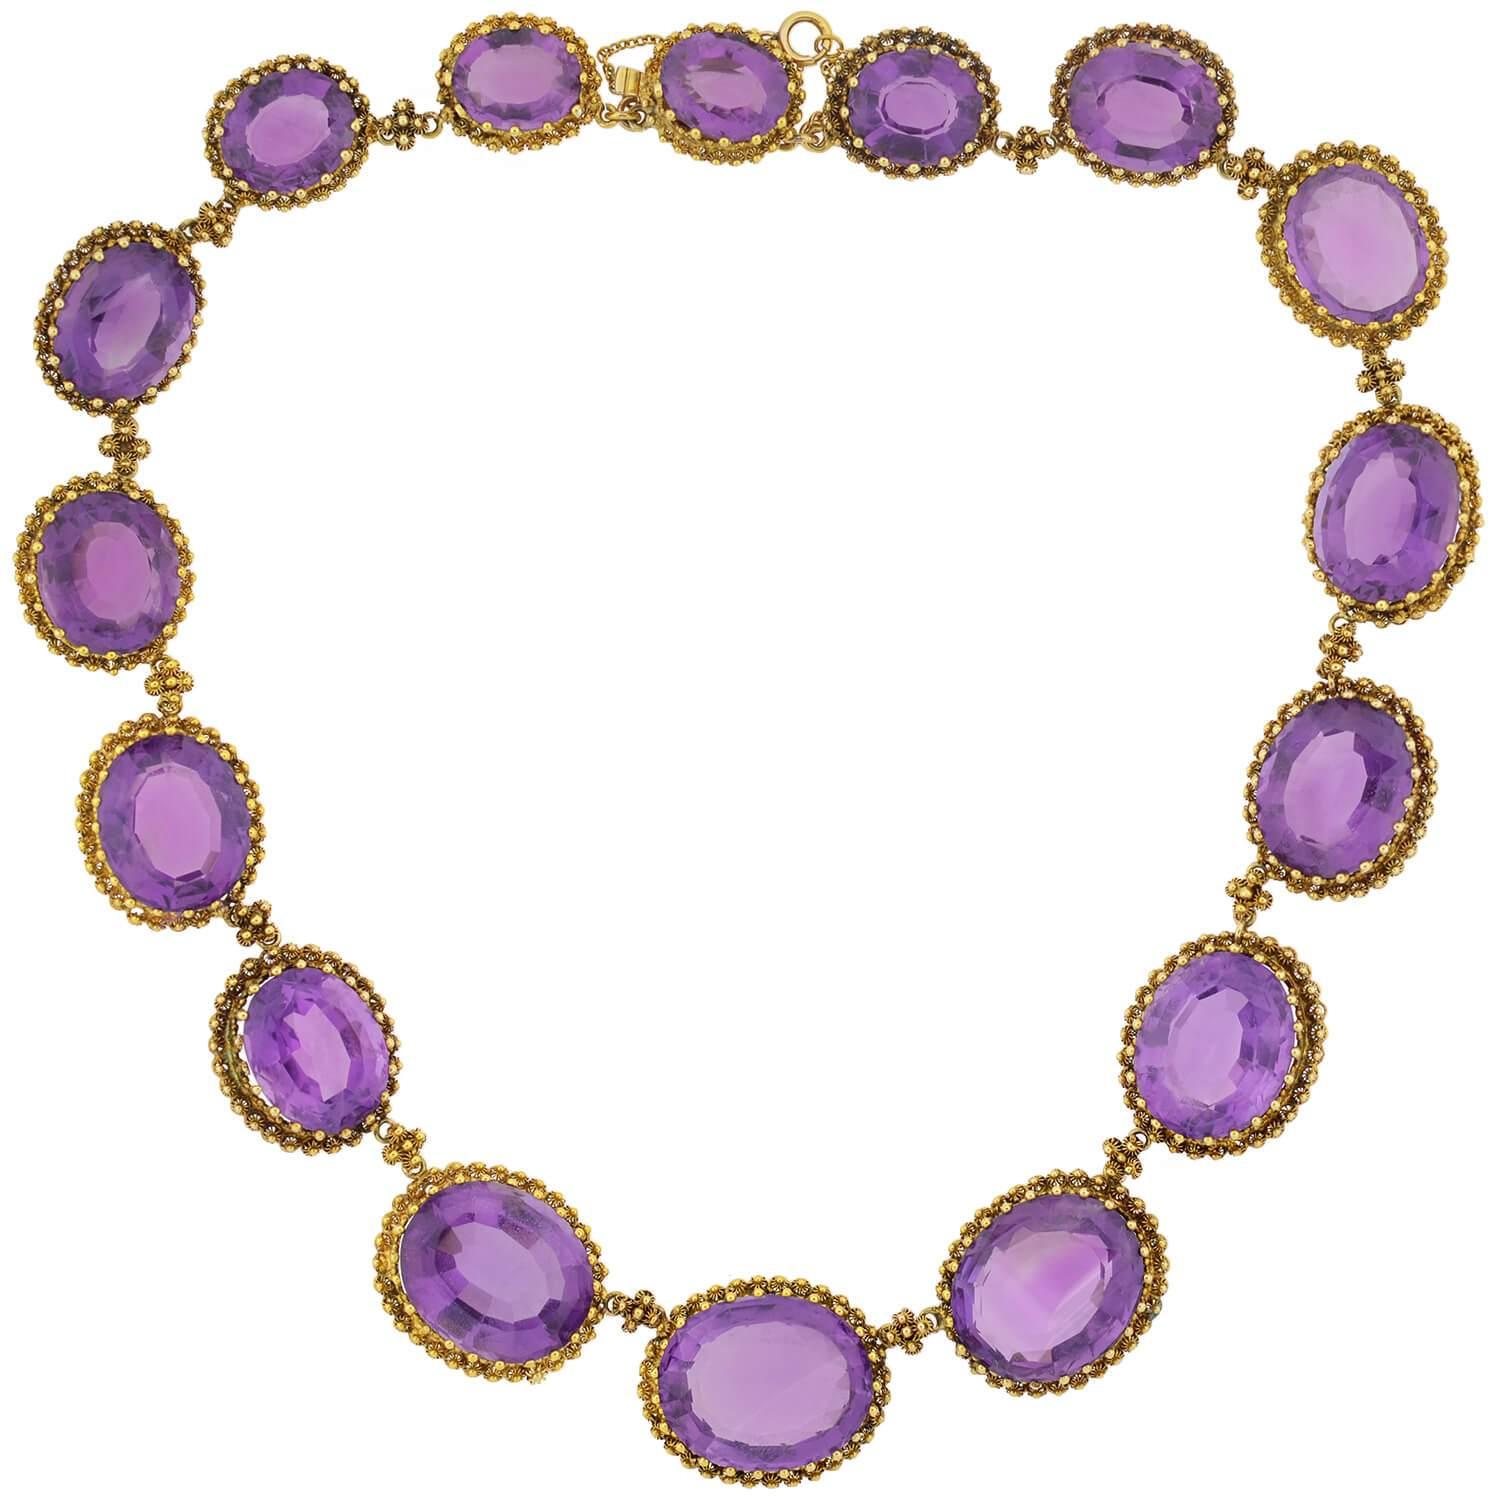 Victorian Faceted Amethyst and Cannetille Wirework Link Necklace